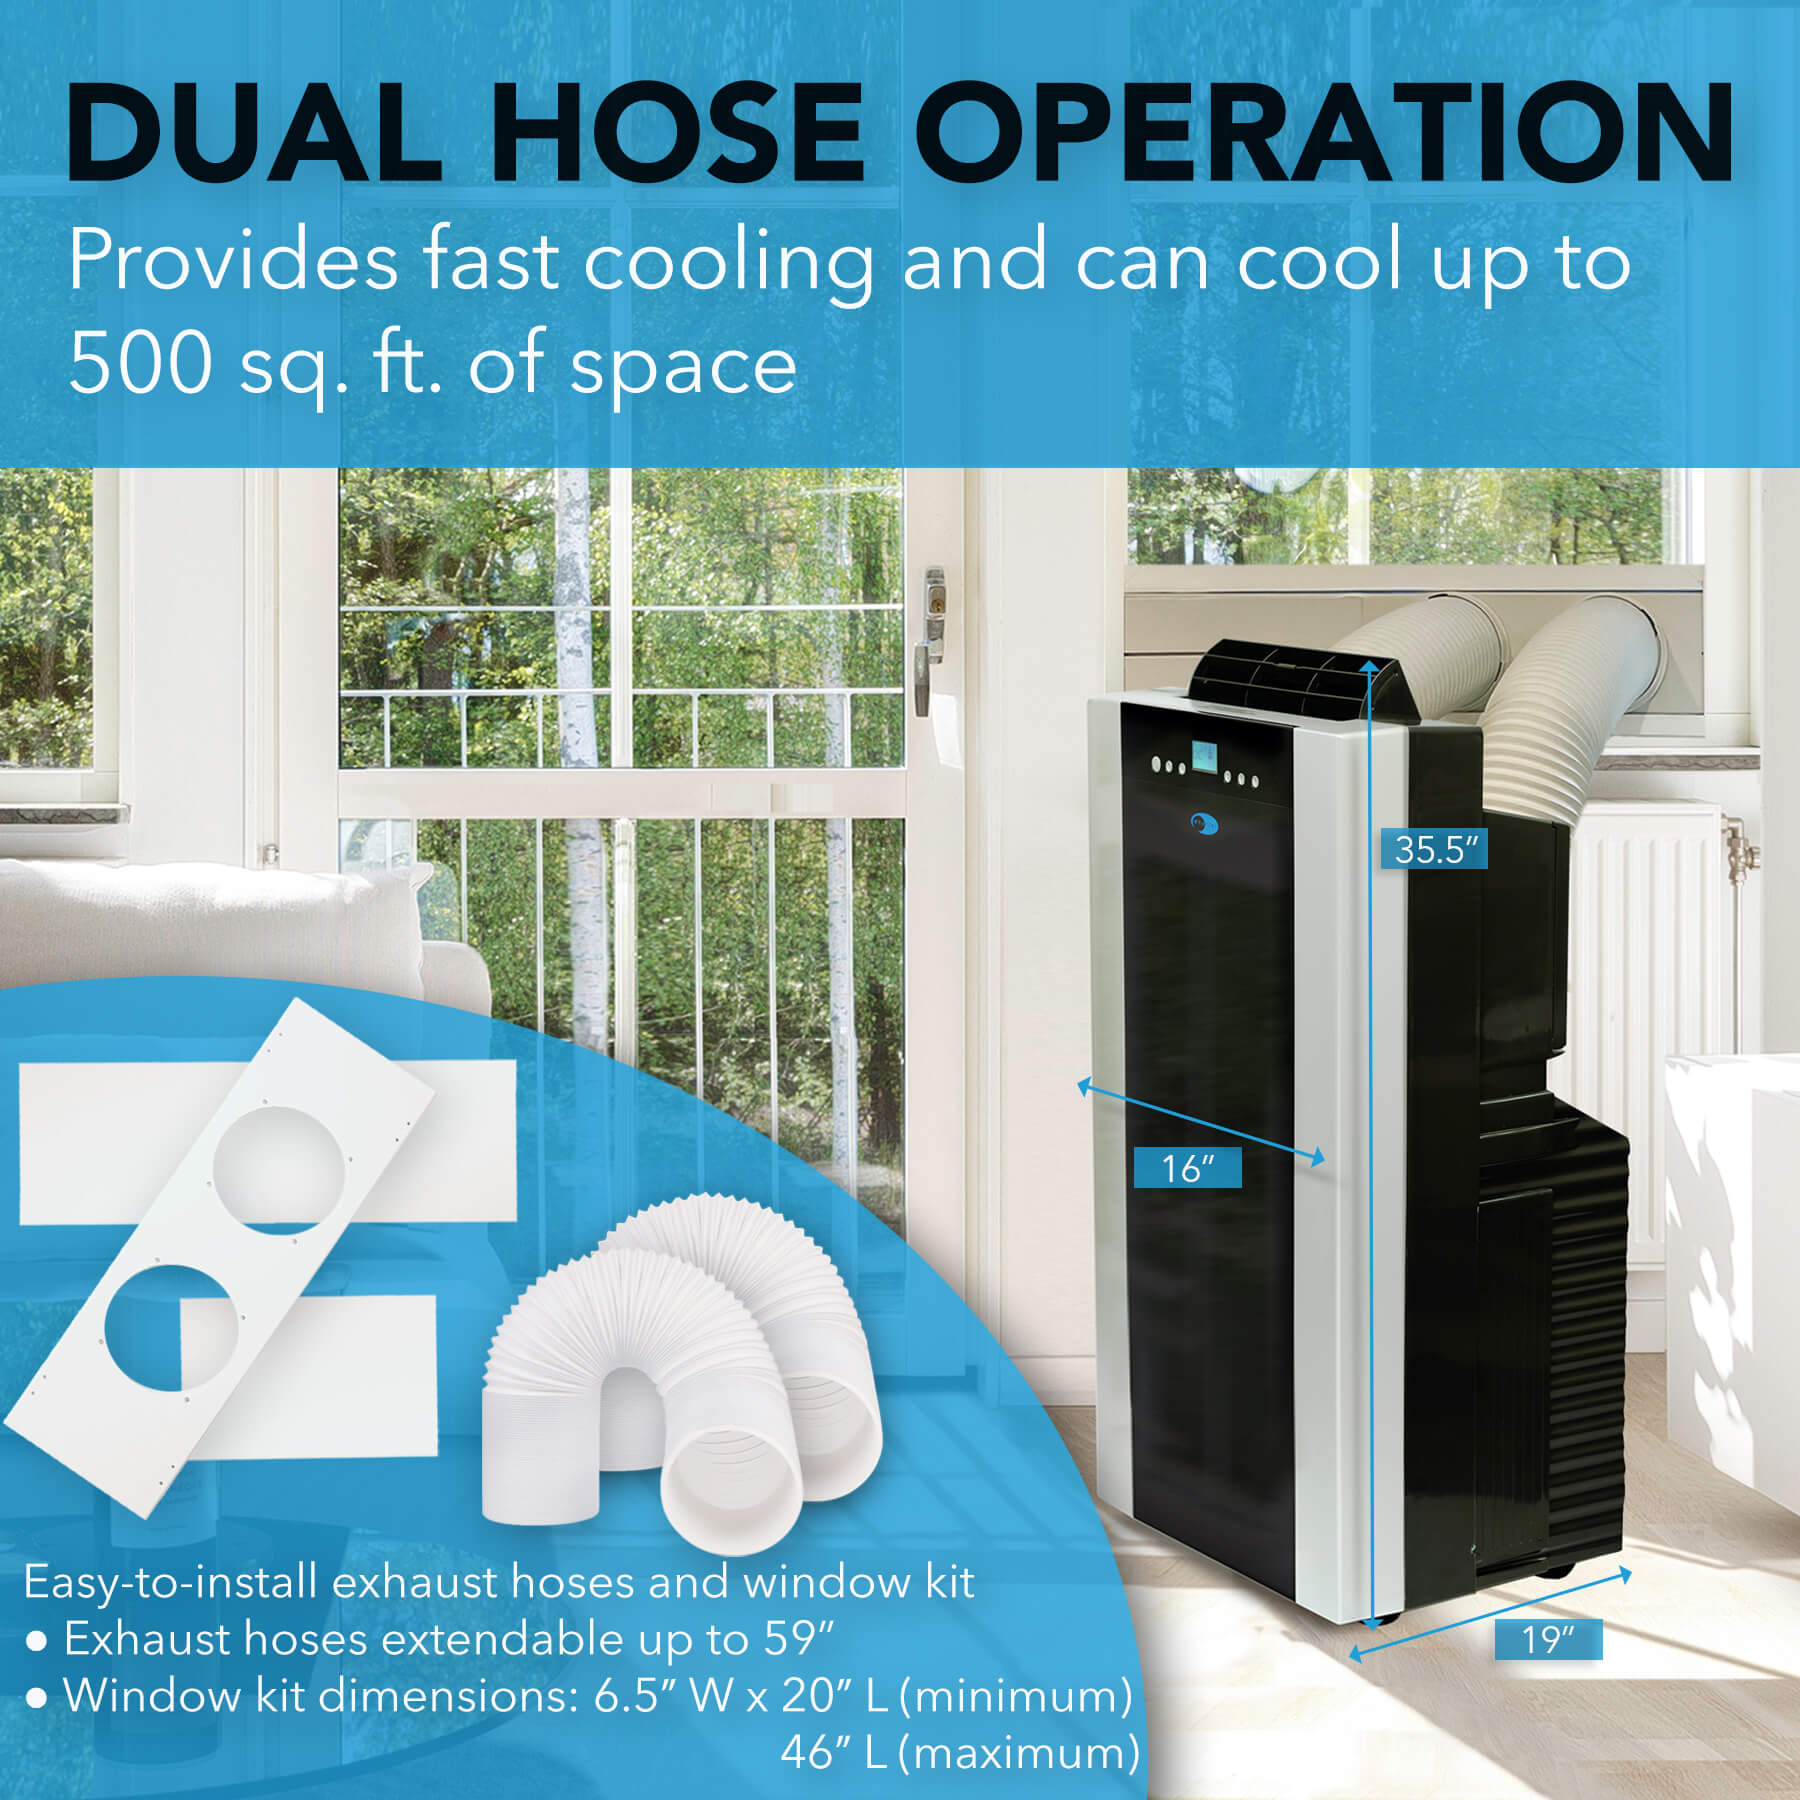 Can You Run A Portable Air Conditioner With No Exhaust Hose?